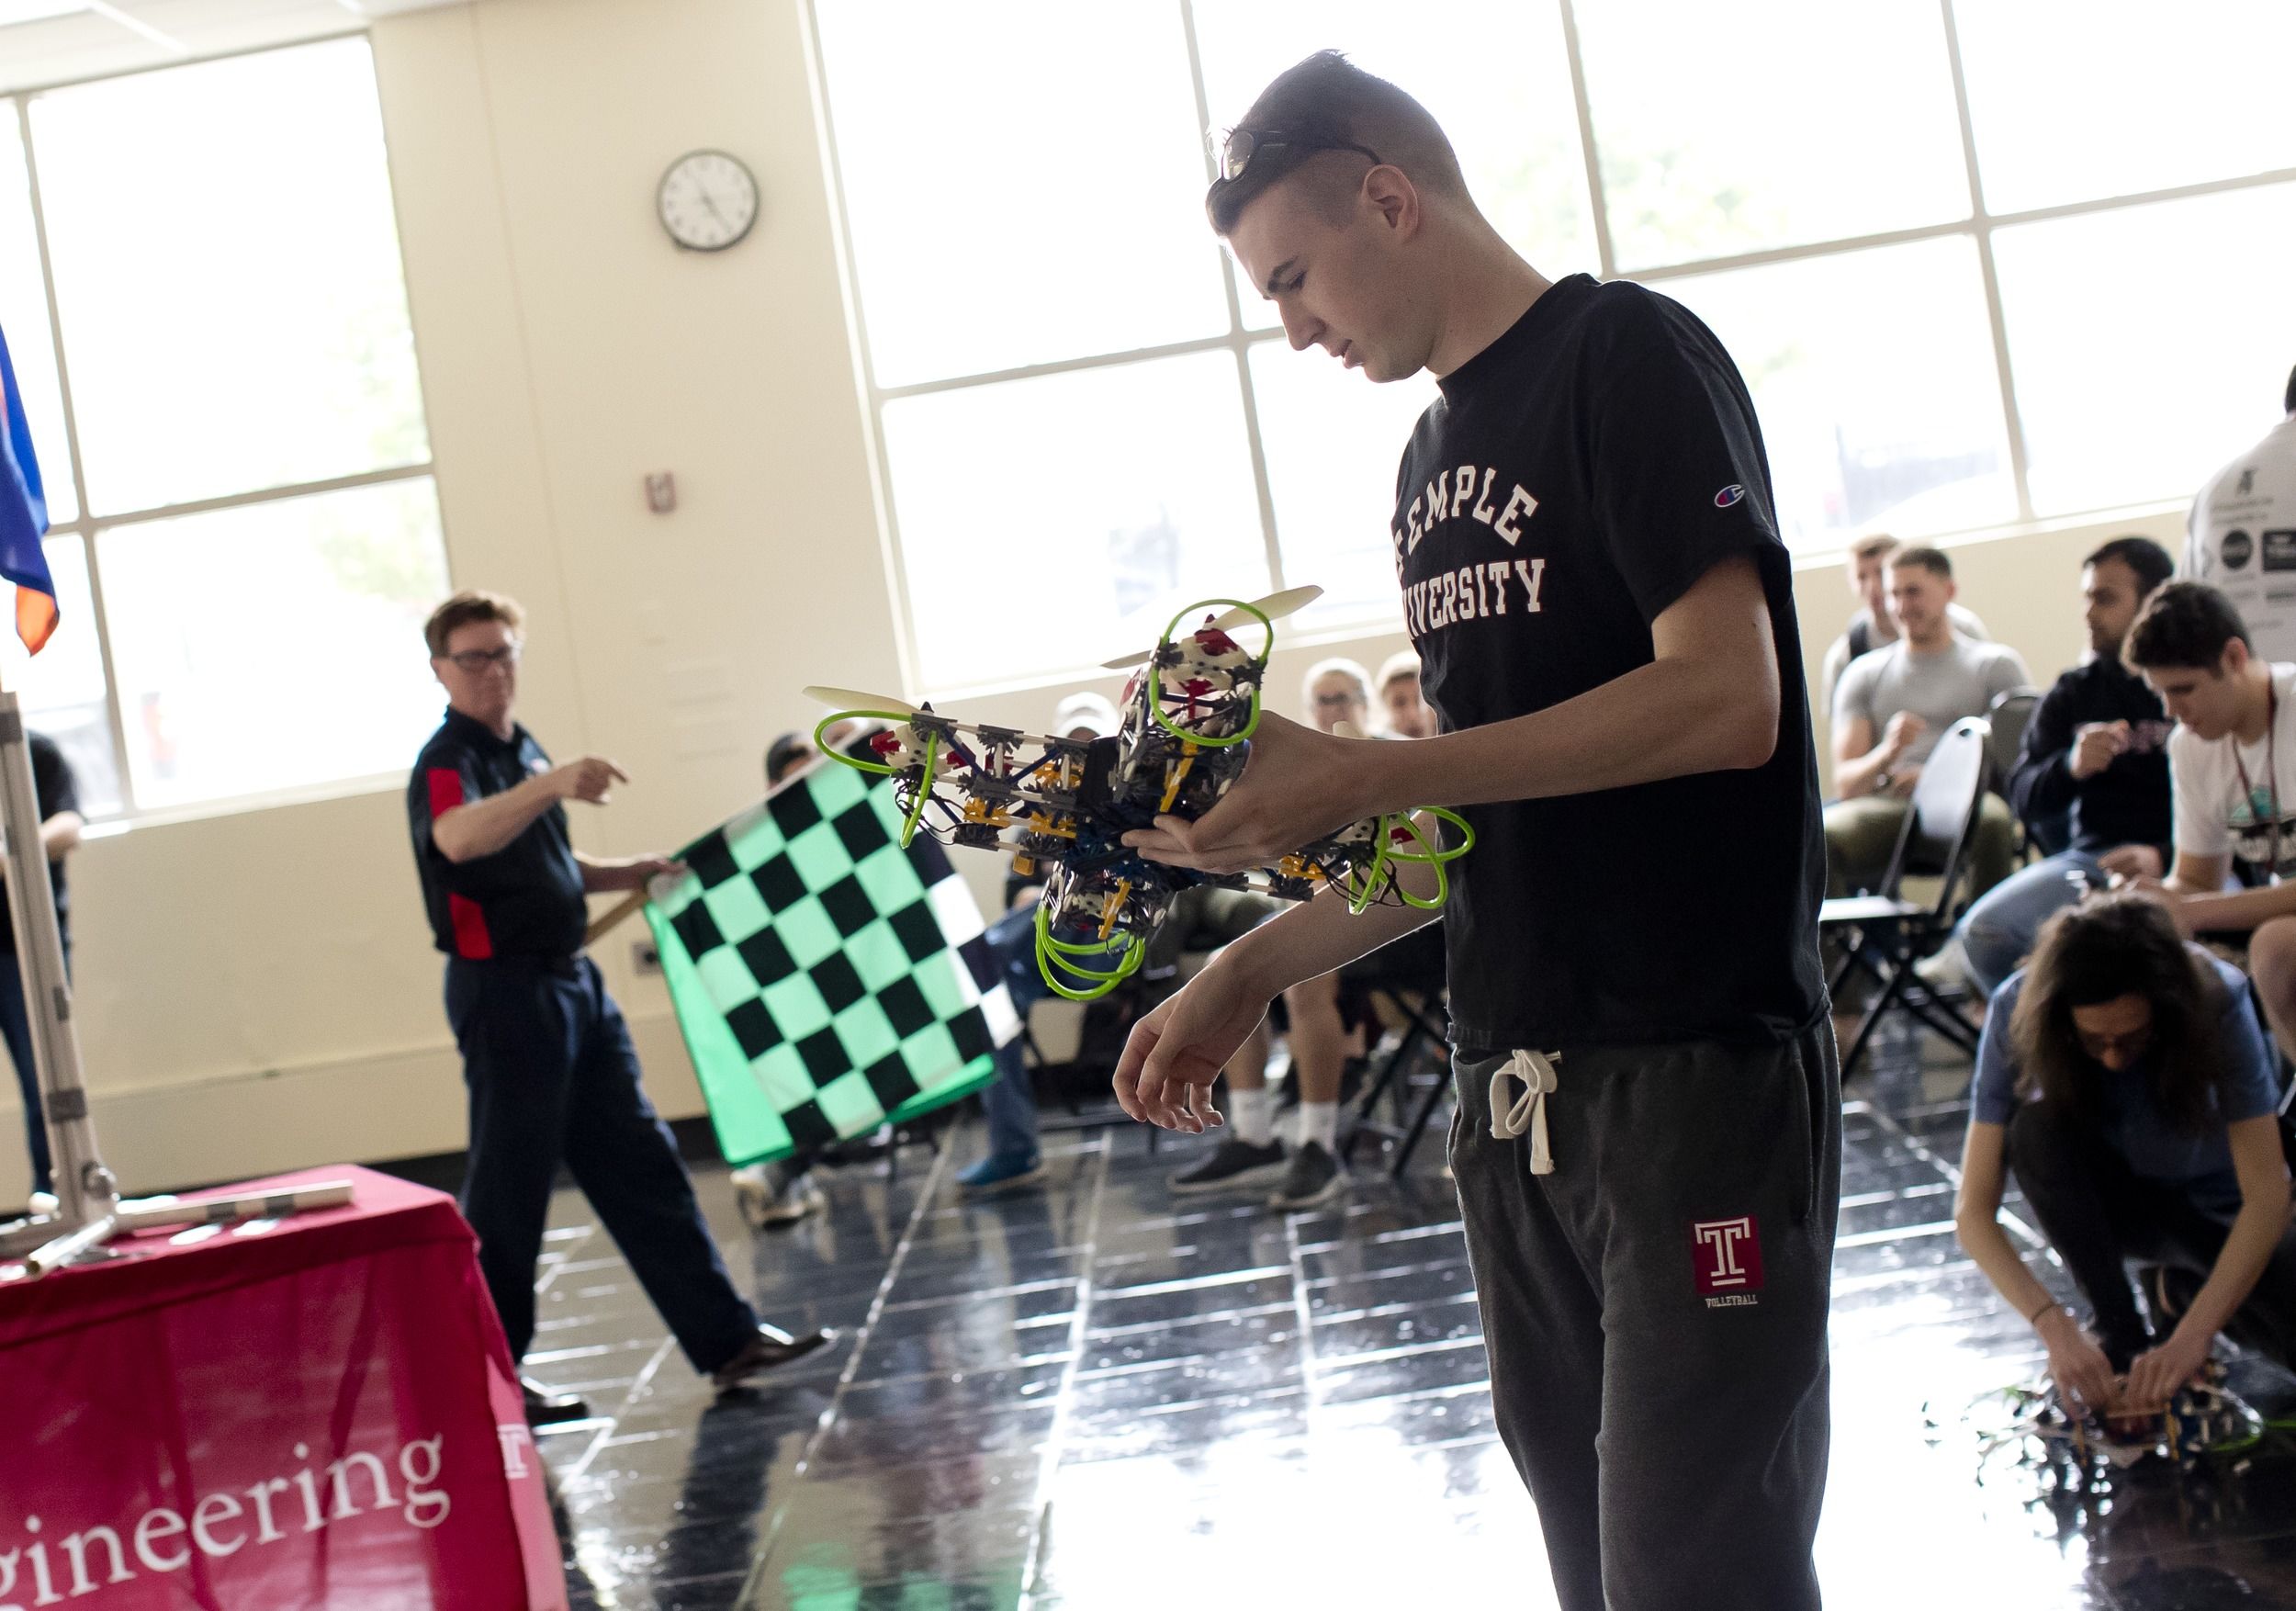 Students participate in a quadcopter race competition.